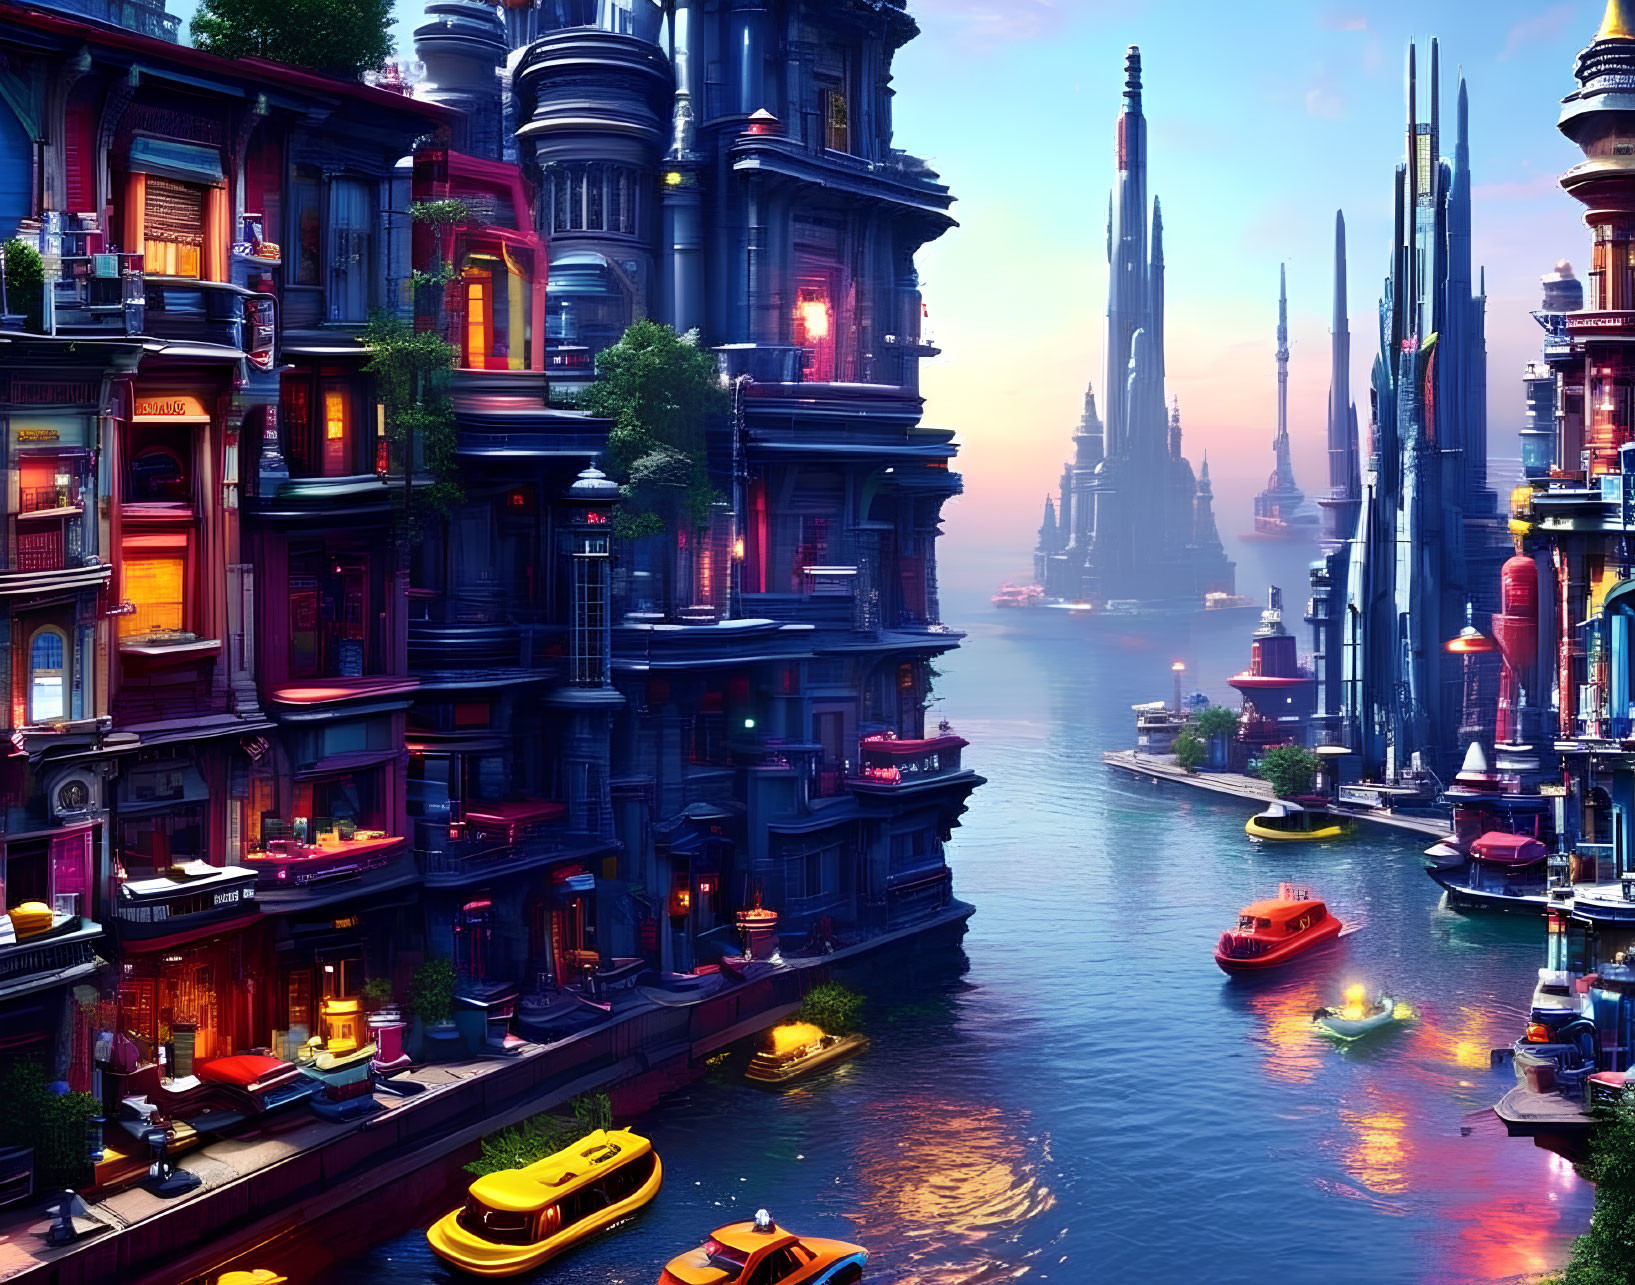 Futuristic cityscape with towering buildings, canal, boats, and glowing lights